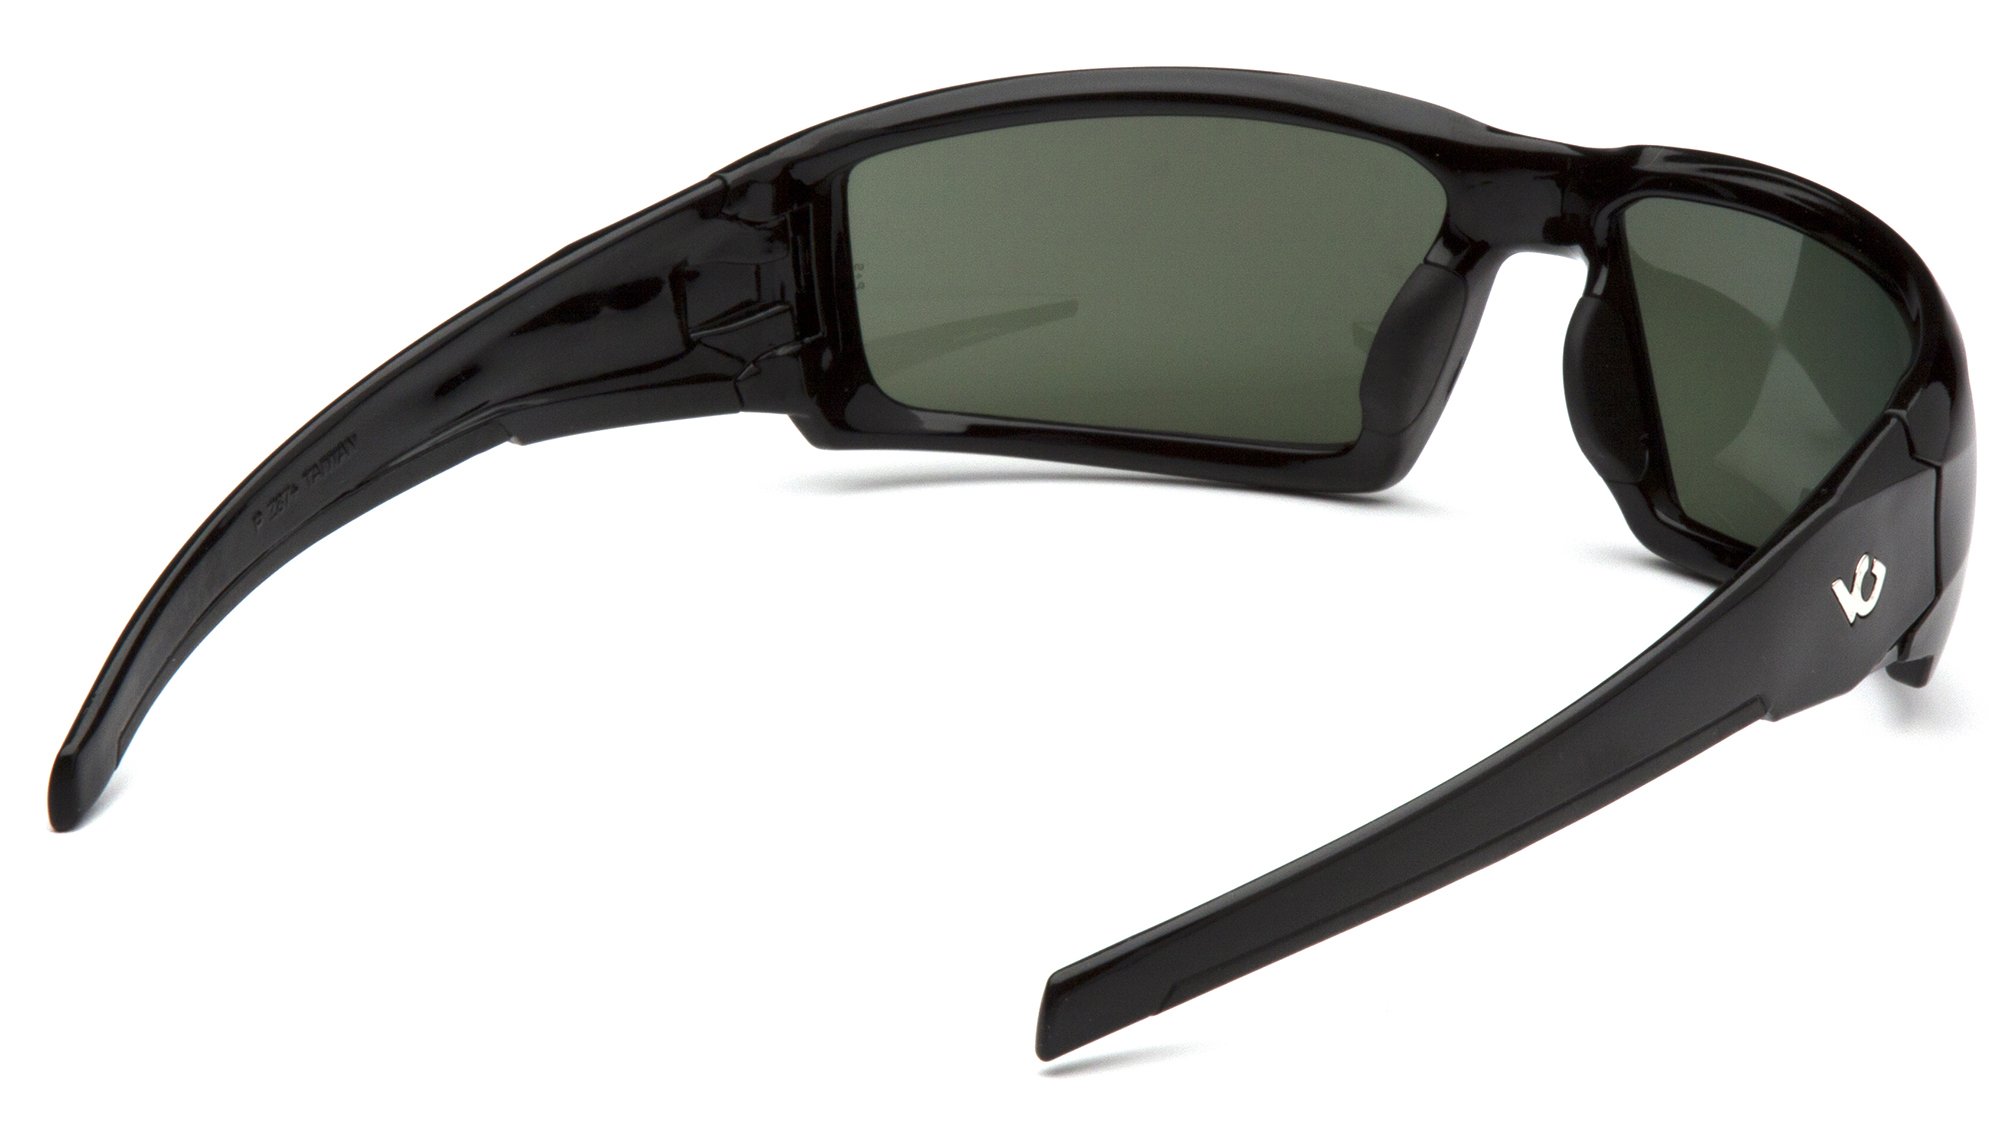 Venture Gear Pagosa Glasses with Anti-Fog Lens